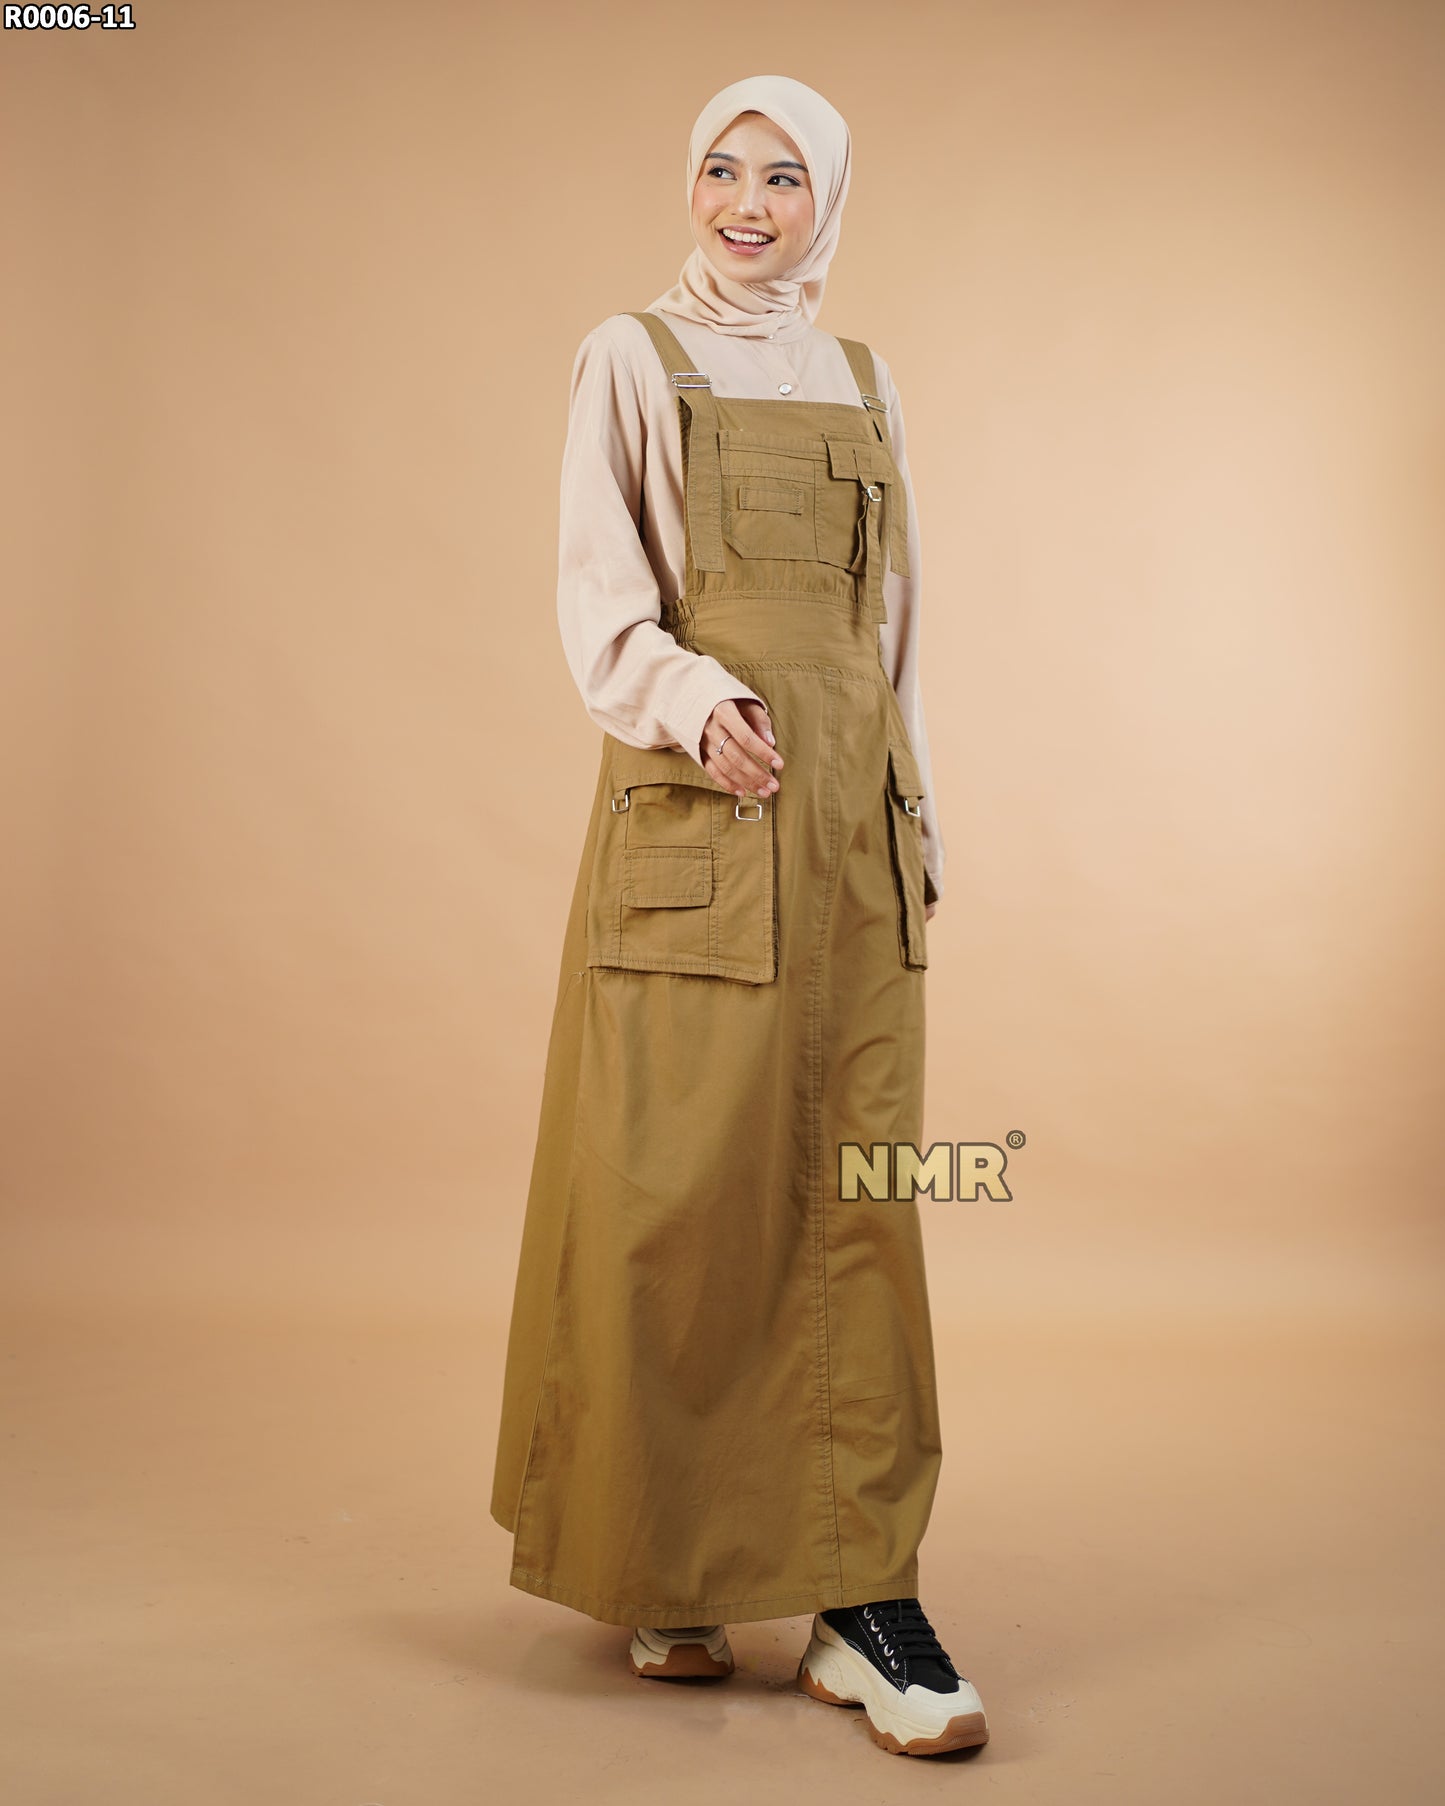 NMR Gamis Jumpsuit Overall Baby Canvas Vol R0006-11